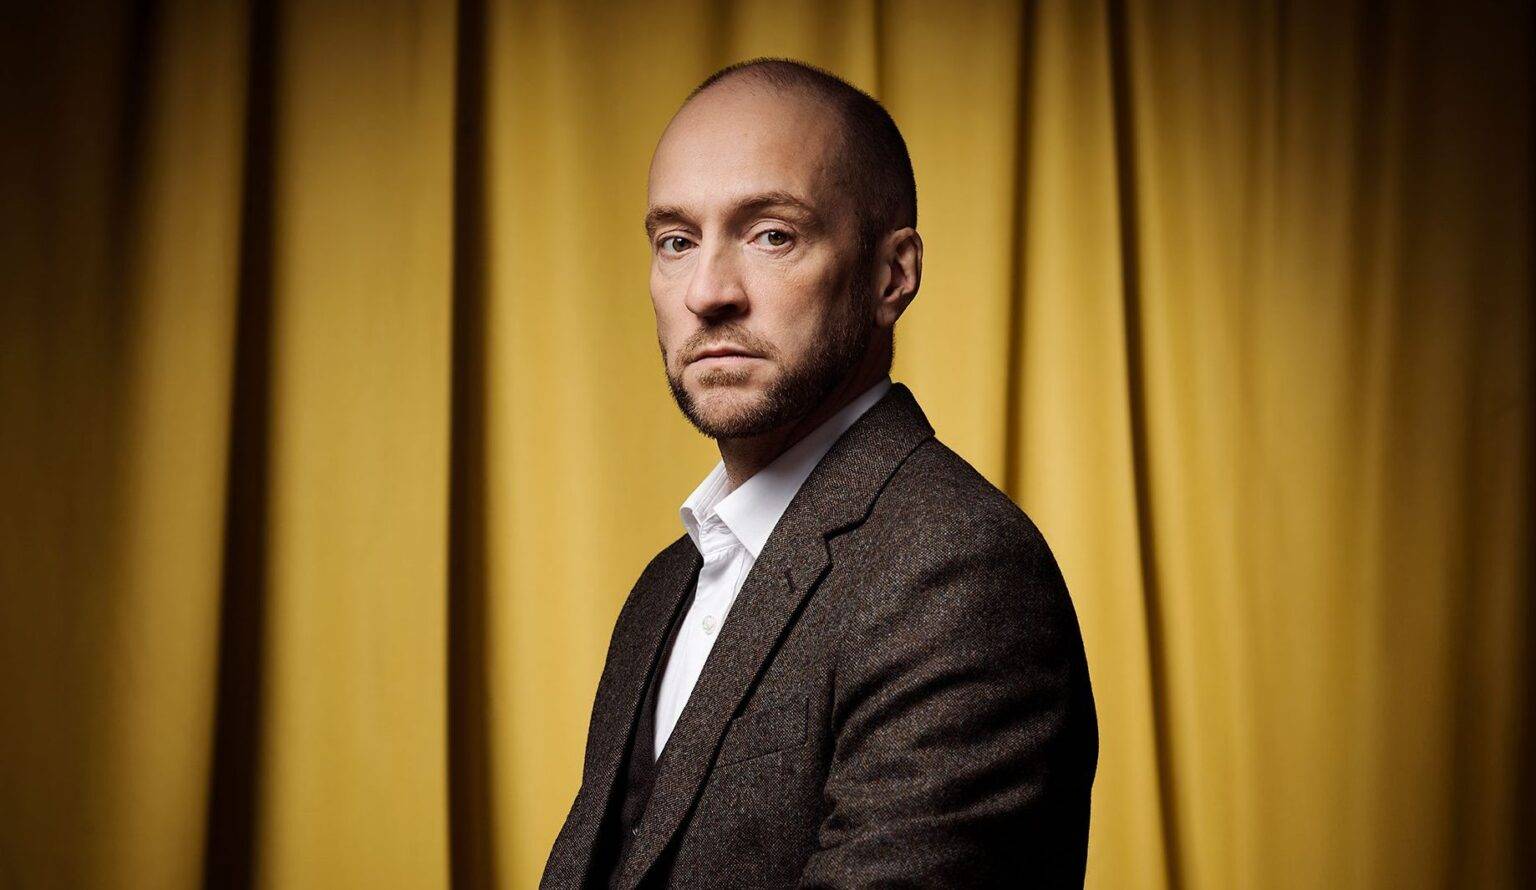 Derren Brown receives daily ‘heart-wrenching’ messages from the public asking for lottery help: ‘I’ll split the winnings with you’